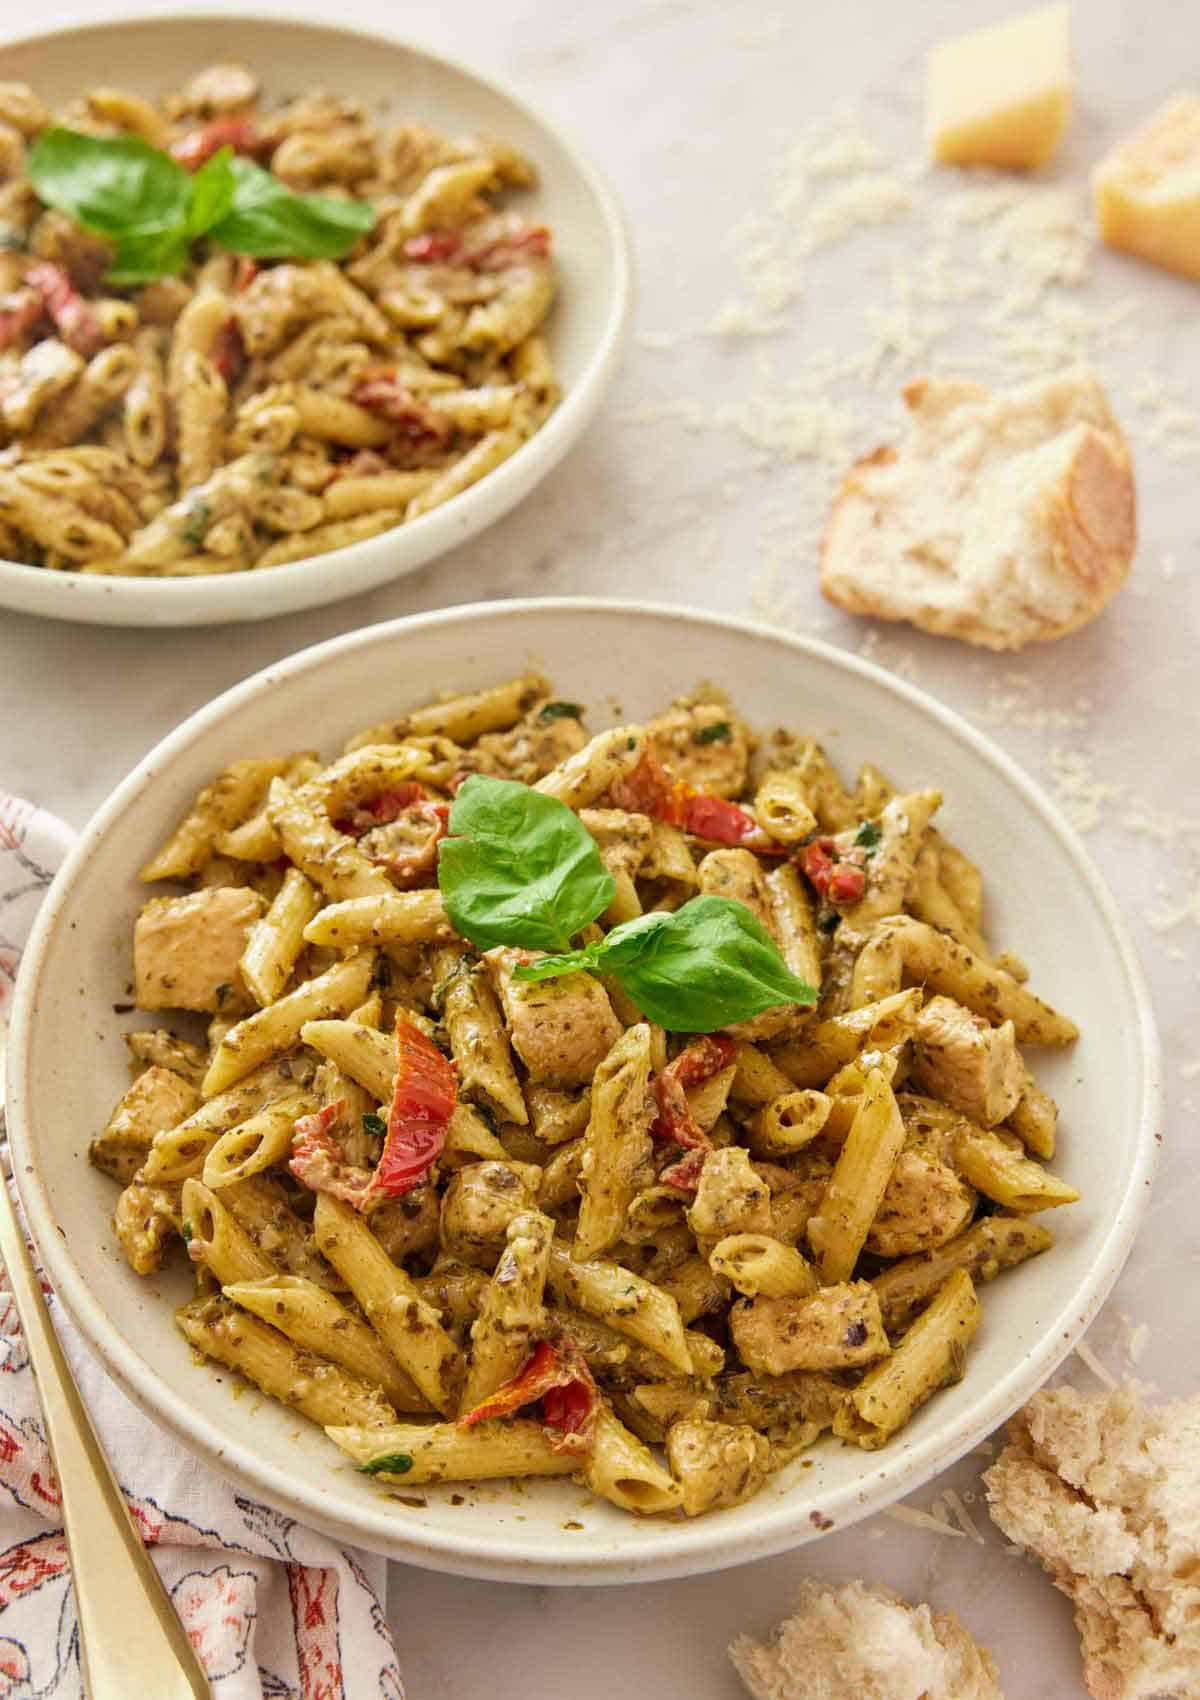 A plate of chicken pesto pasta with basil and sun-dried tomatoes with some bread, shredded parmesan and another plate of pasta in the background.